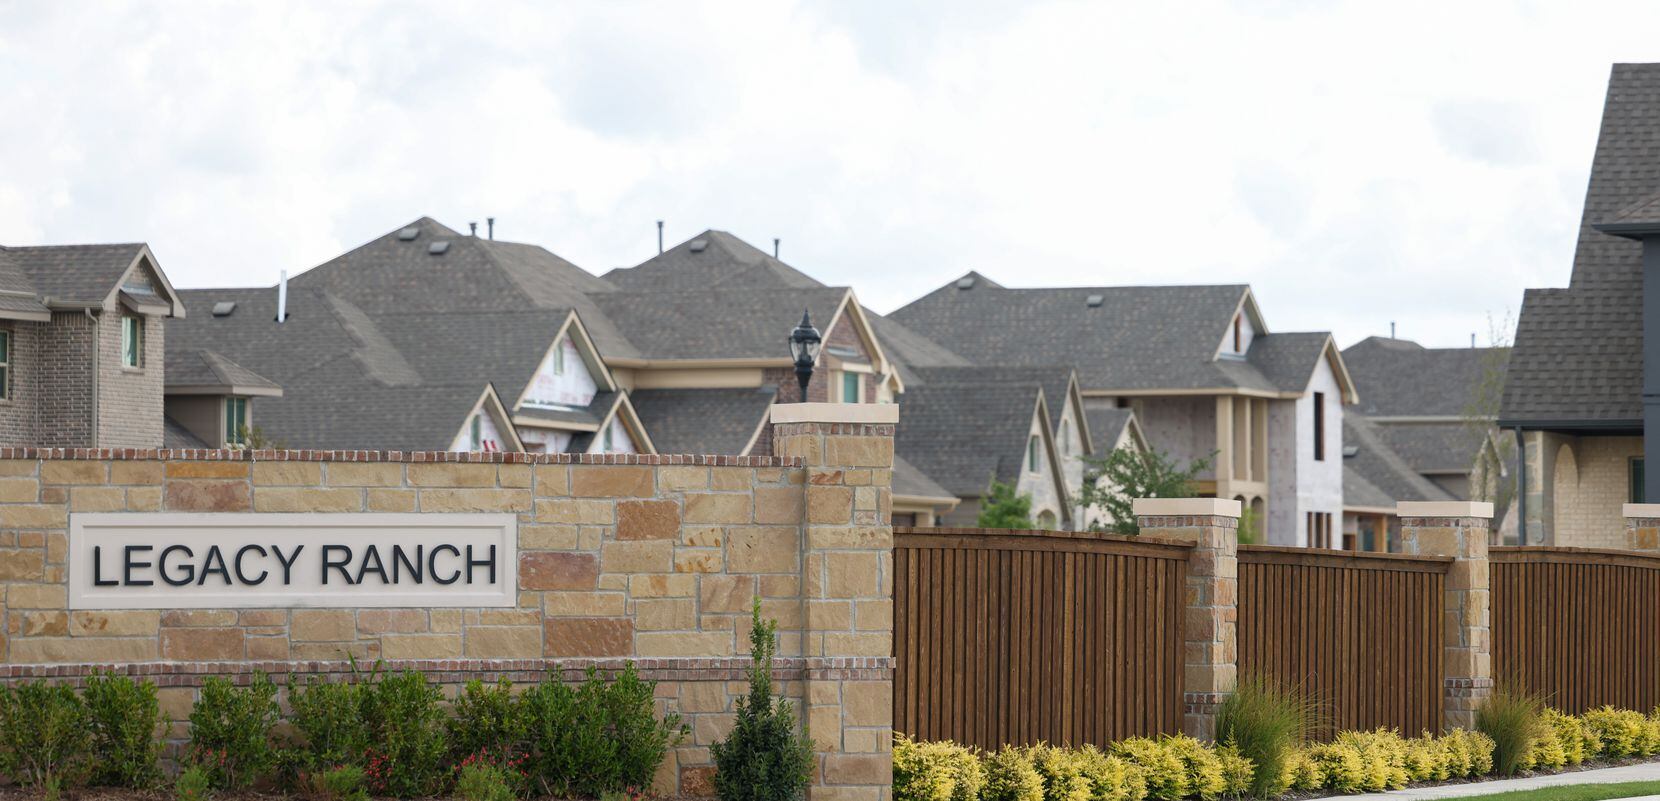 The entrance to the Legacy Ranch housing development is marked with a sign off of North...